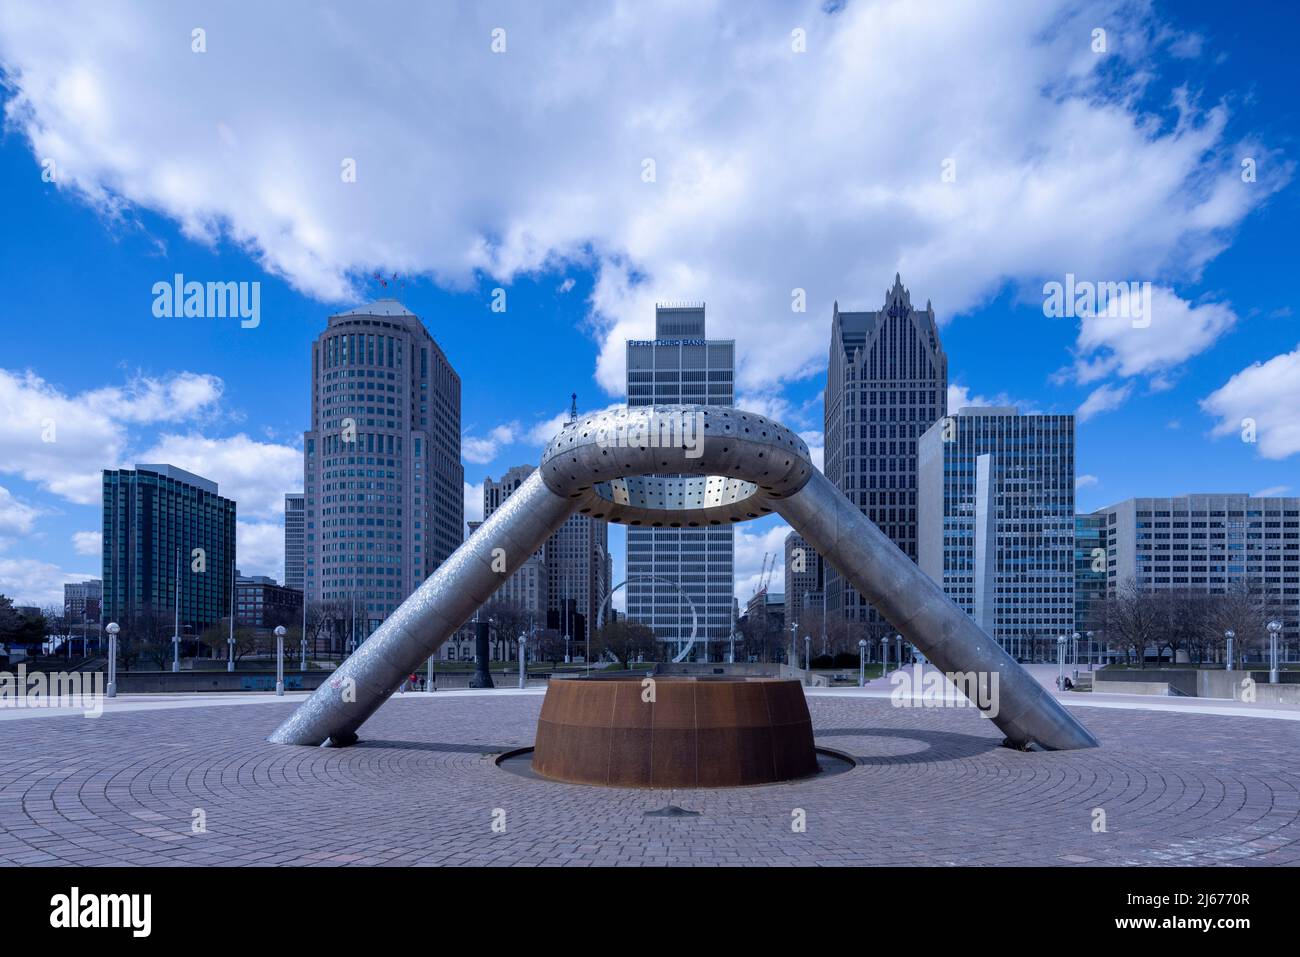 Horace E. Dodge and Son Memorial Fountain at the Philip A. Hart Plaza, downtown Detroit, Michigan, USA, with view of skyscrapers beyond Stock Photo